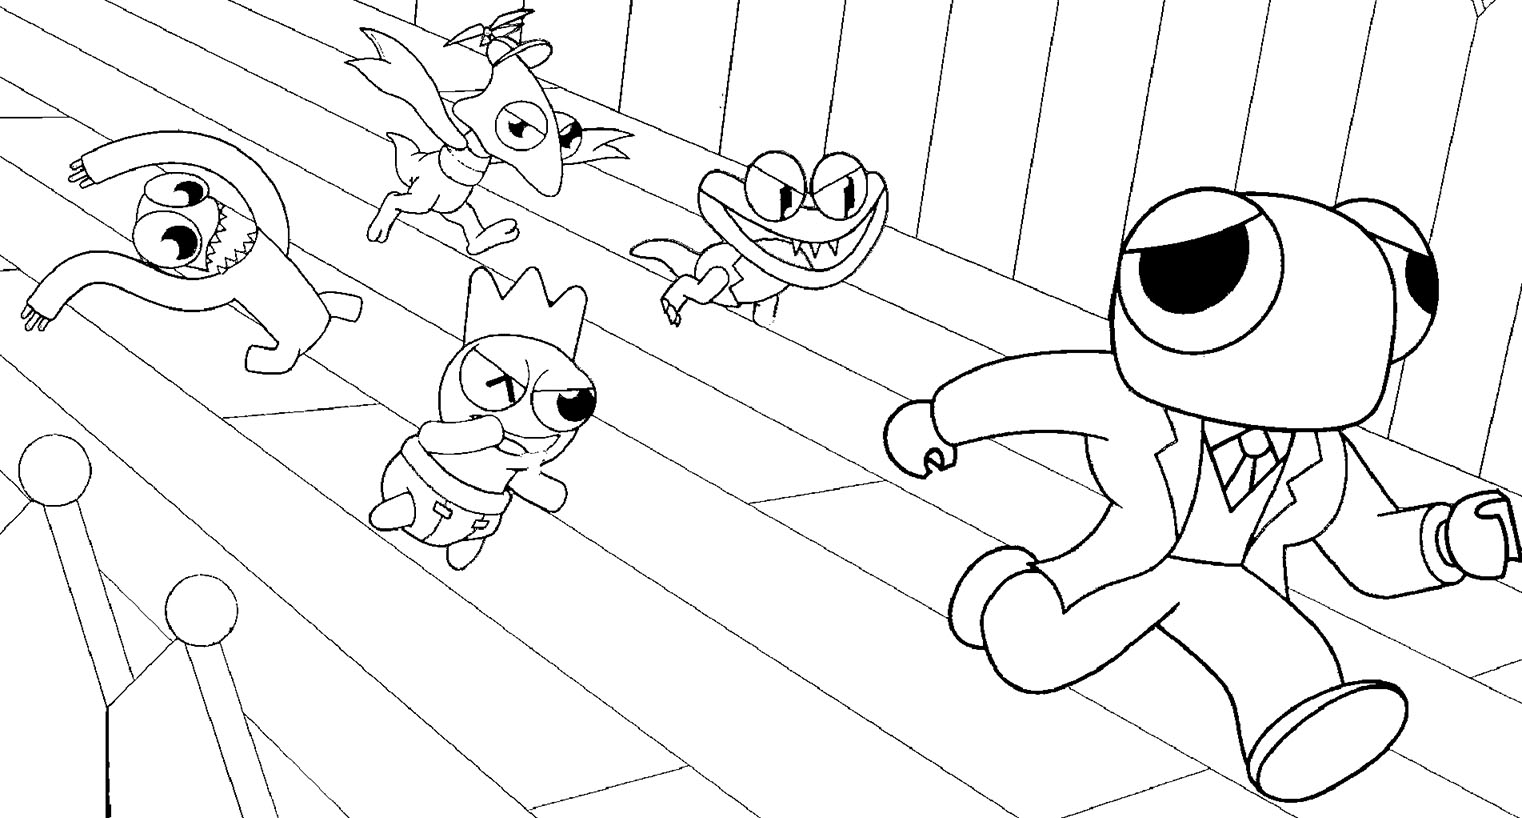 Coloring pages rainbow friends 2 – 23 – Coloring Pages